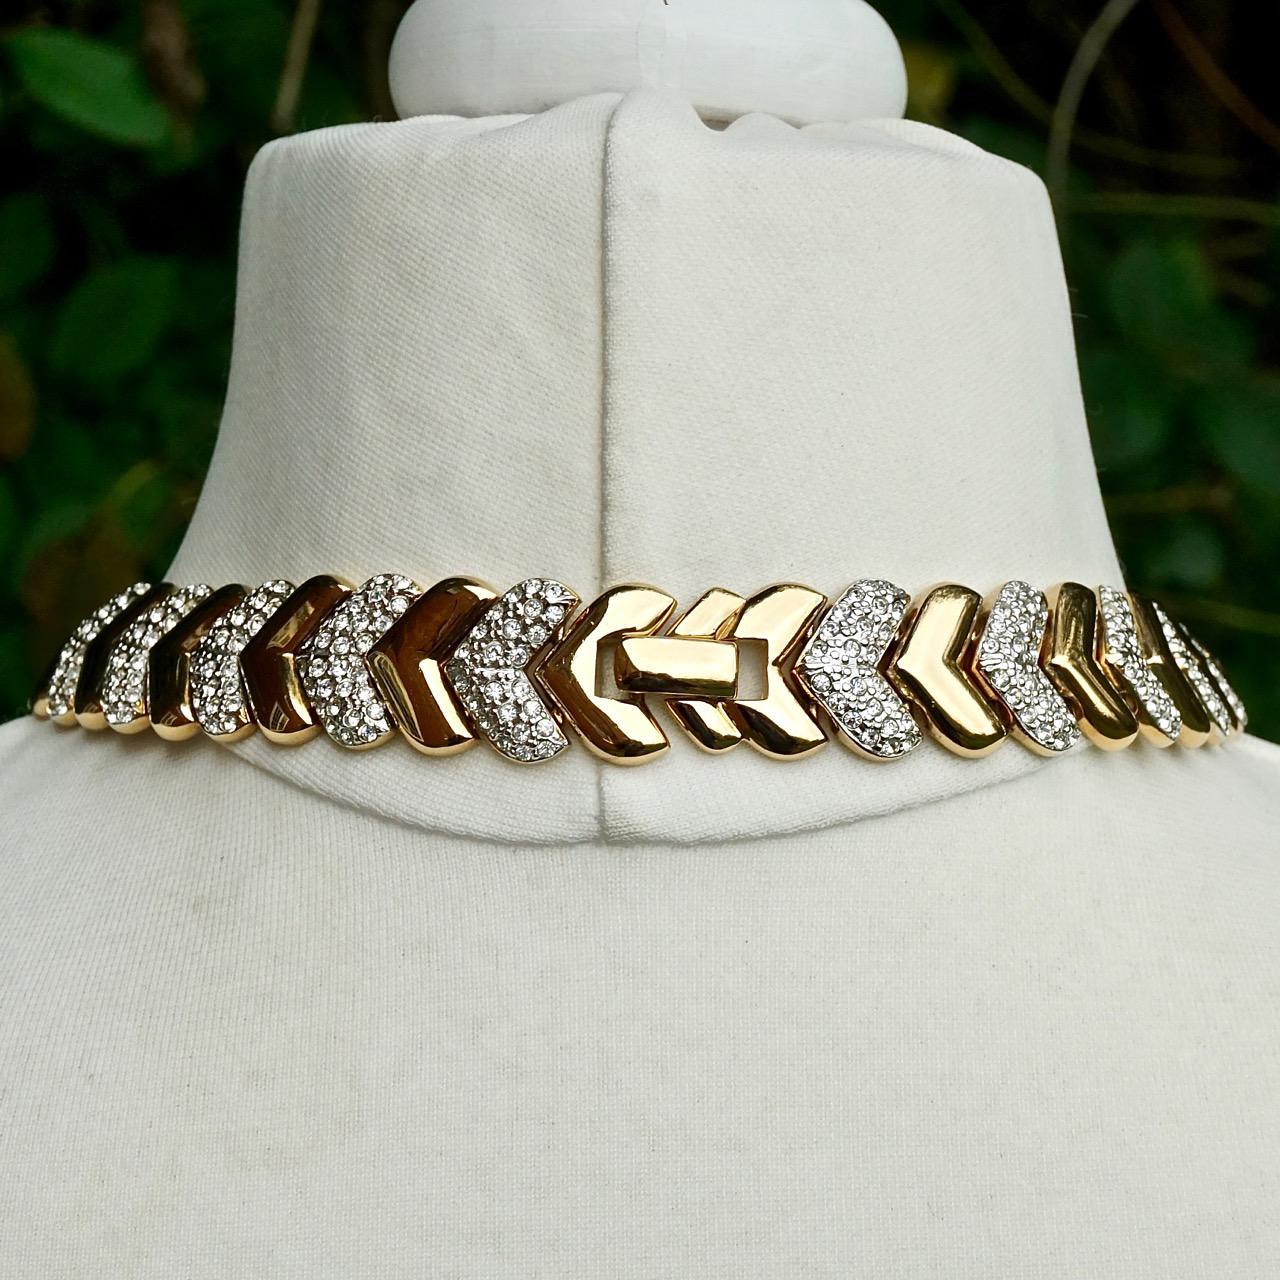 Gold Plated and Rhinestone Heavy Chevron Collar Necklace circa 1980s For Sale 5